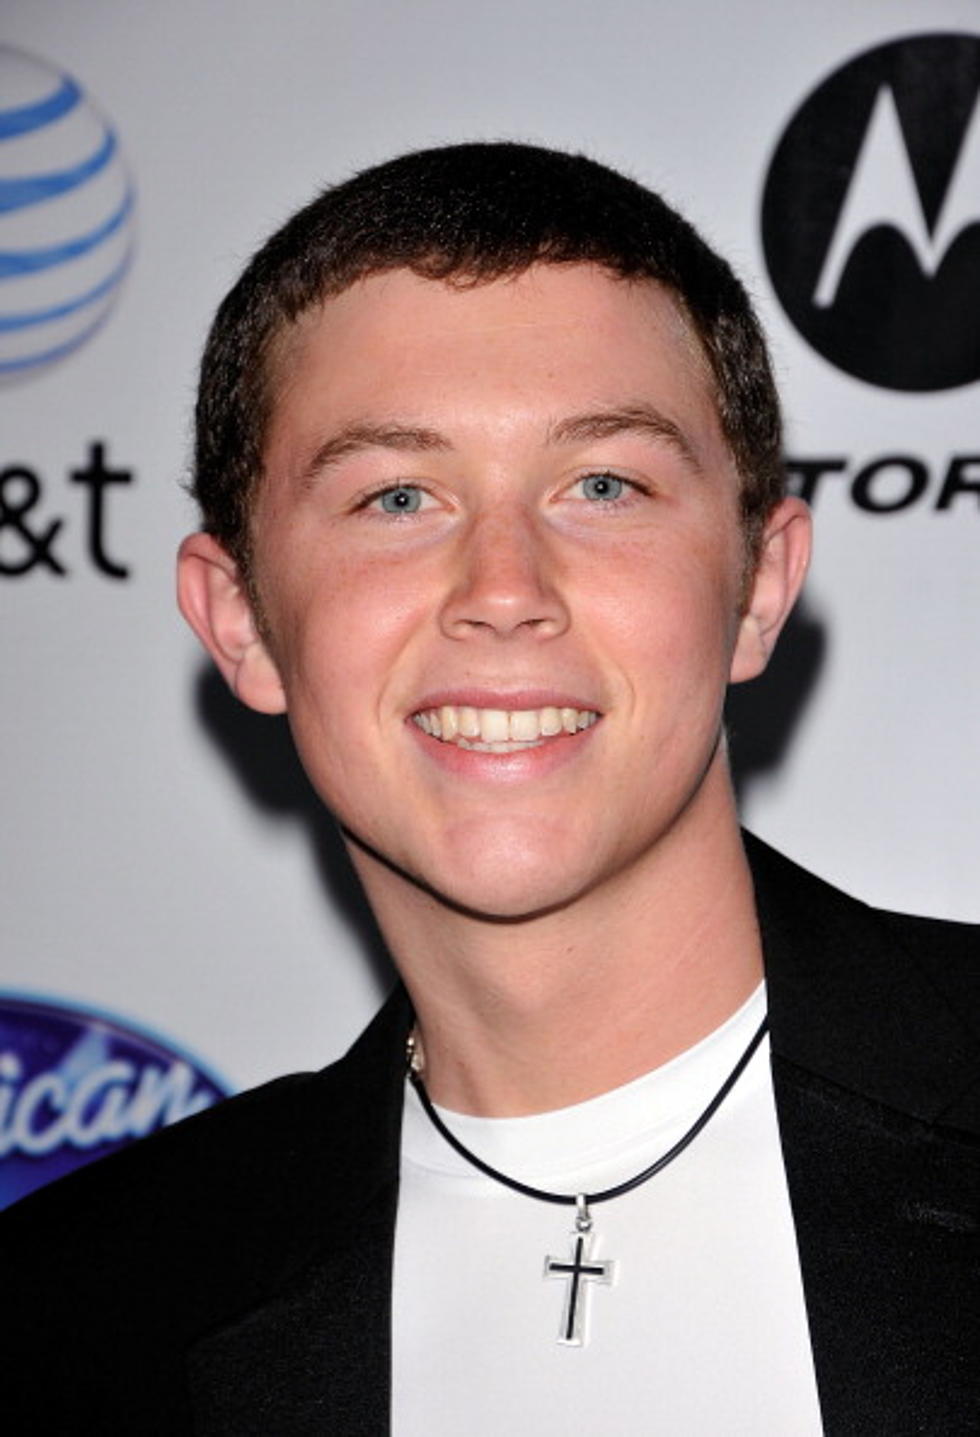 Idol’s Country Boy Scotty McCreery Holds His Own Last Night! [VIDEO]